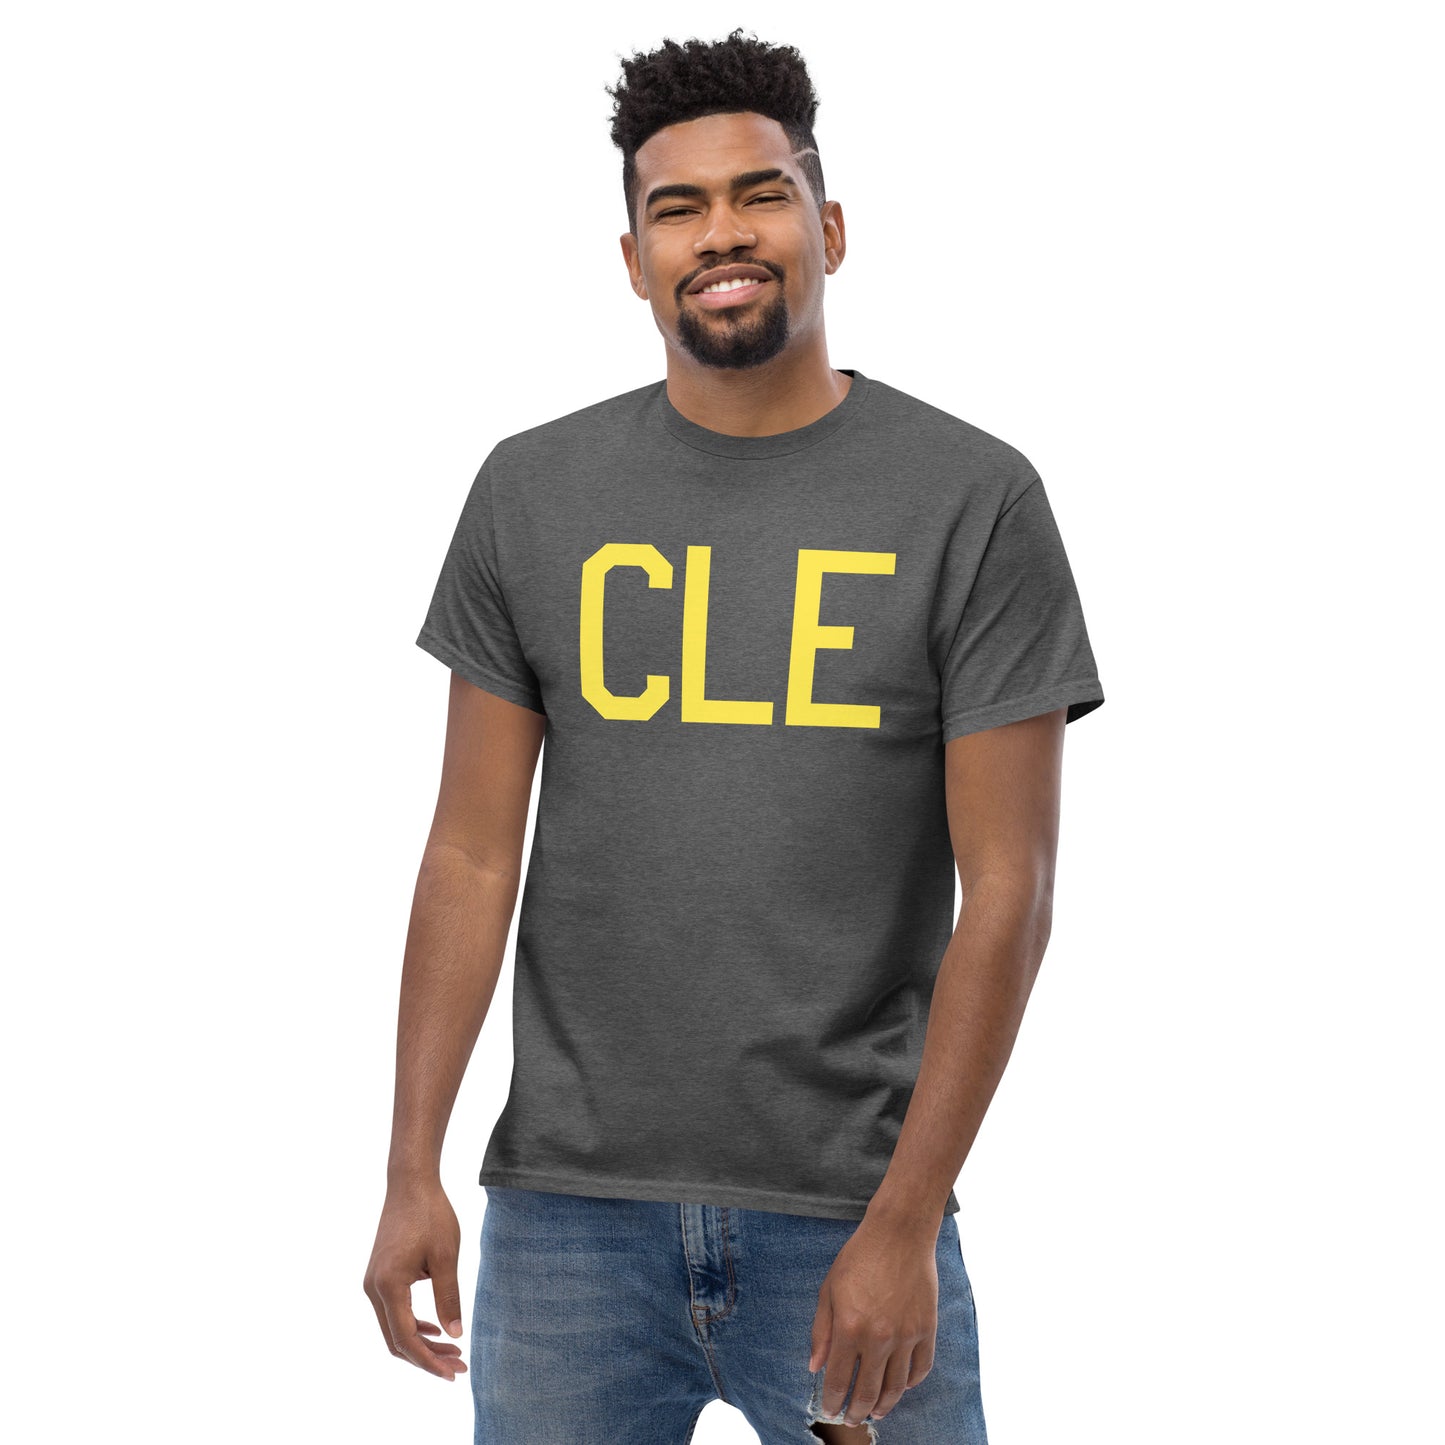 Aviation-Theme Men's T-Shirt - Yellow Graphic • CLE Cleveland • YHM Designs - Image 06